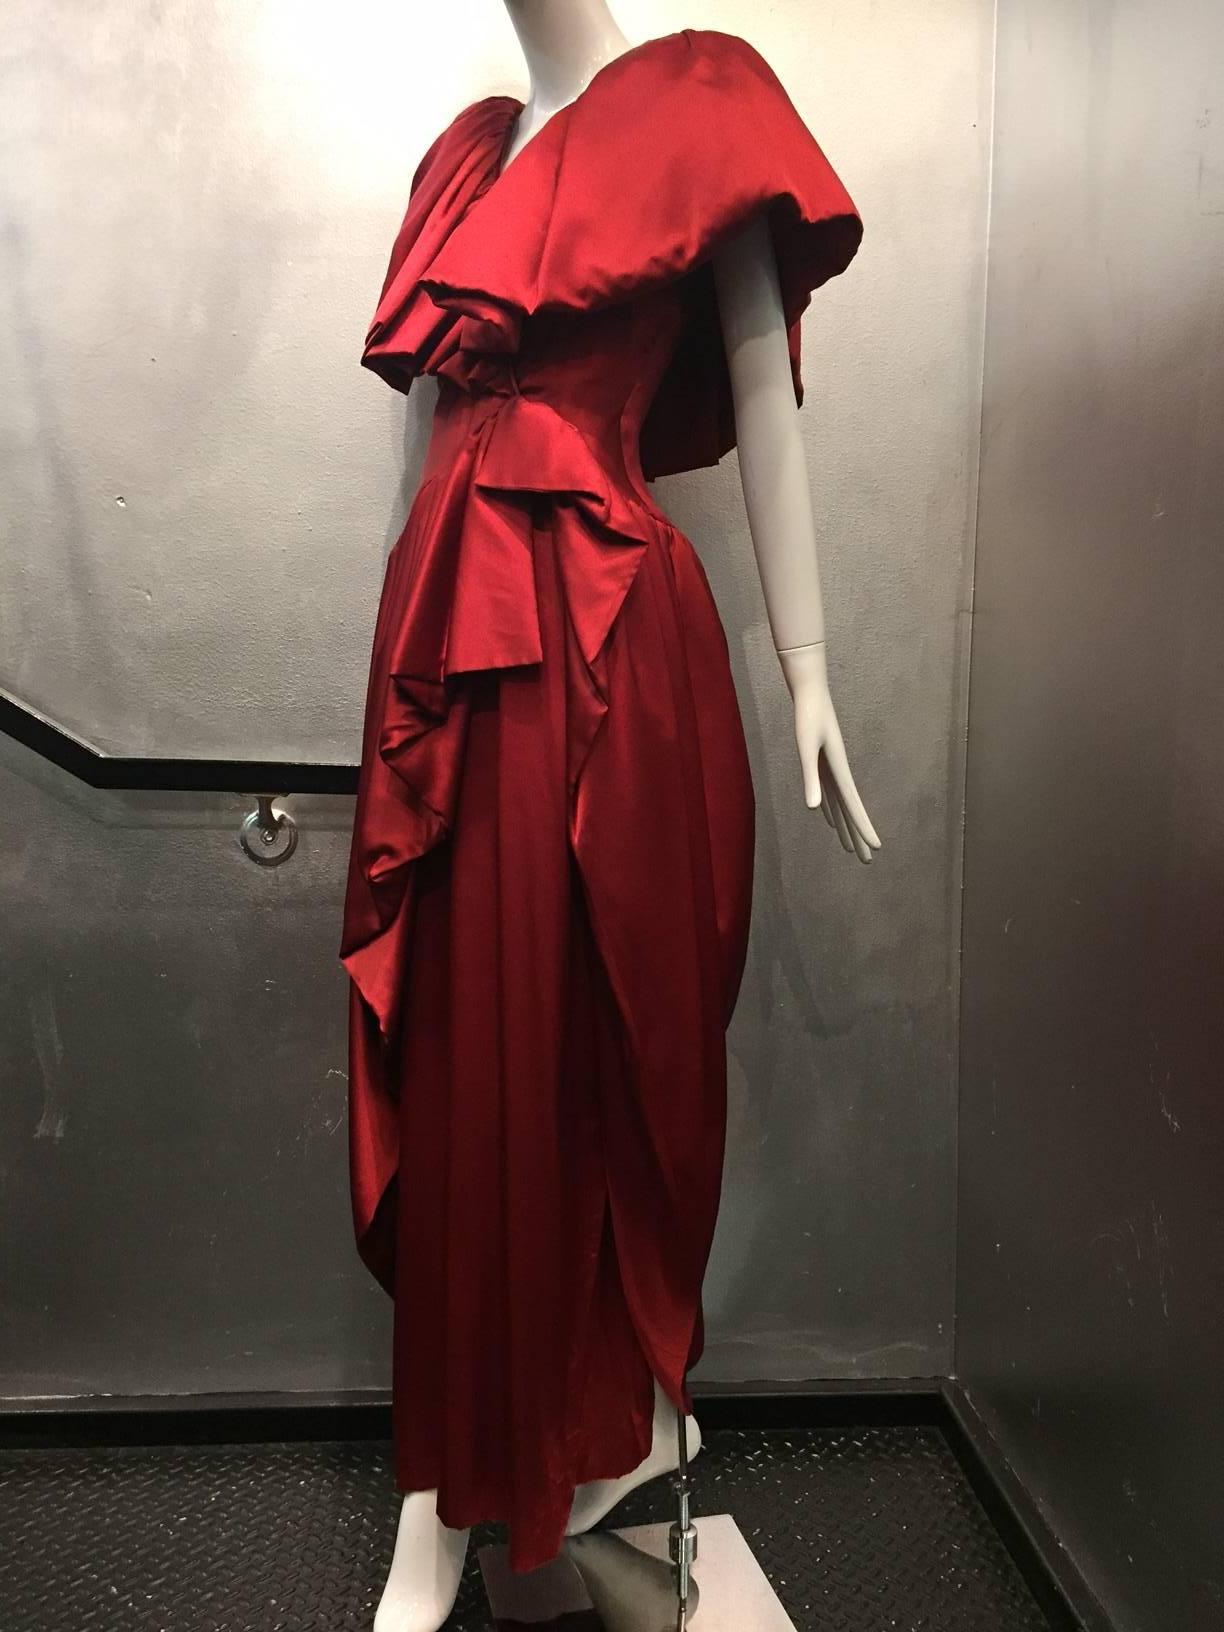 1980s British couture scarlet silk satin ruffled neckline and hem evening gown: fitted and shaped waist and bodice are trimmed with extravagant ruffles at neckline.  Heavily gathered skirt with underskirt. Ruffles and overskirt are faced with